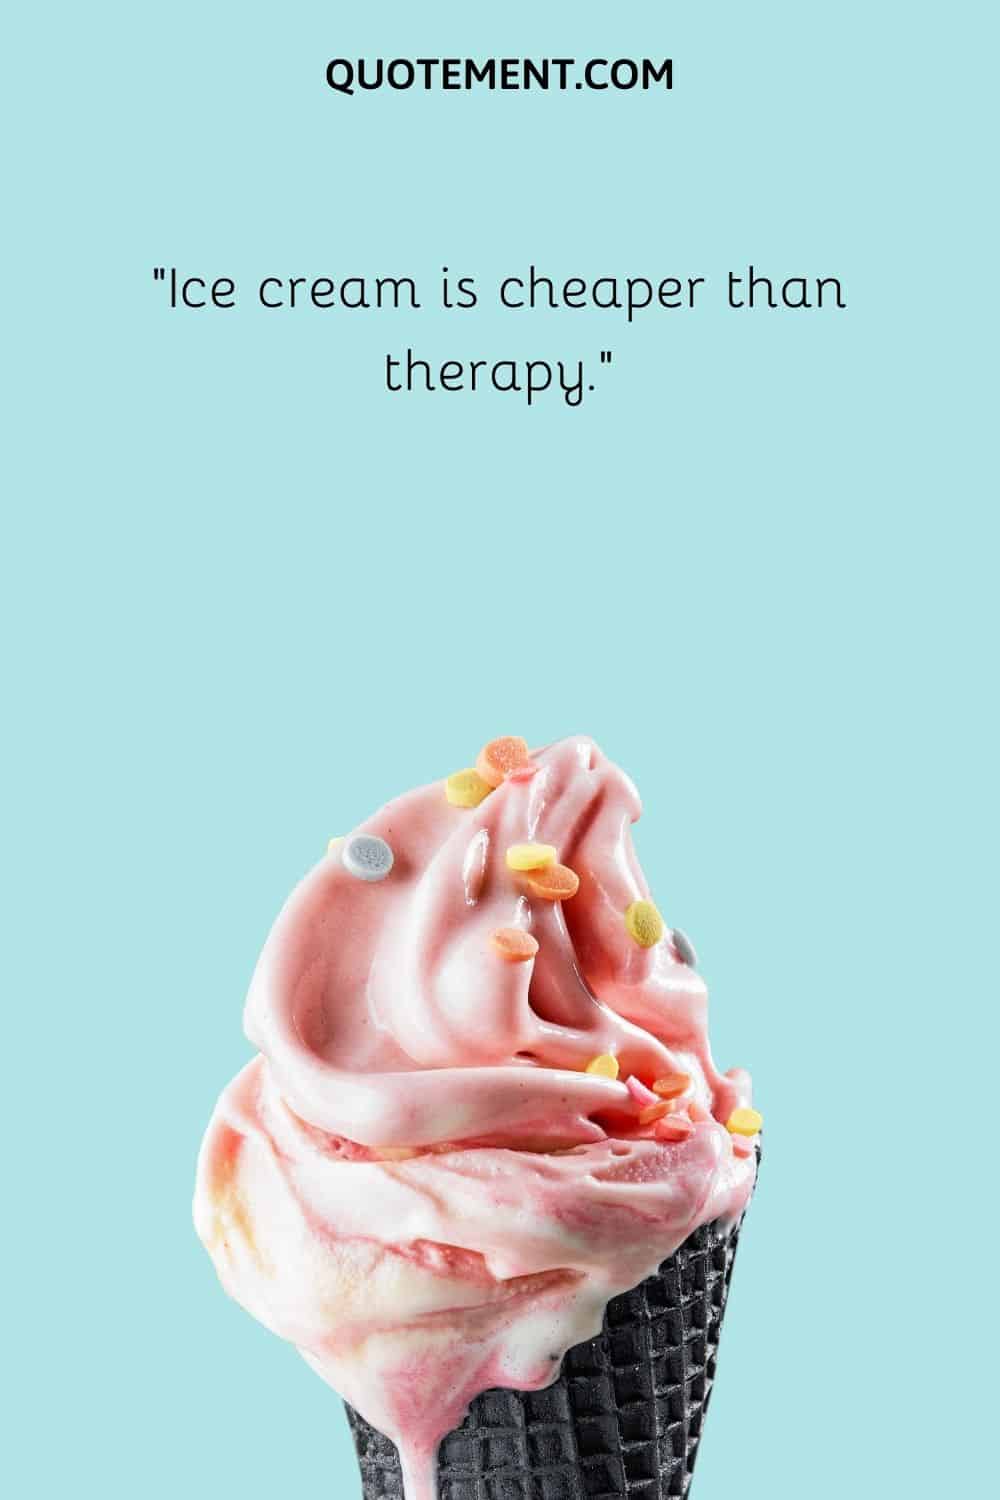 Ice cream is cheaper than therapy